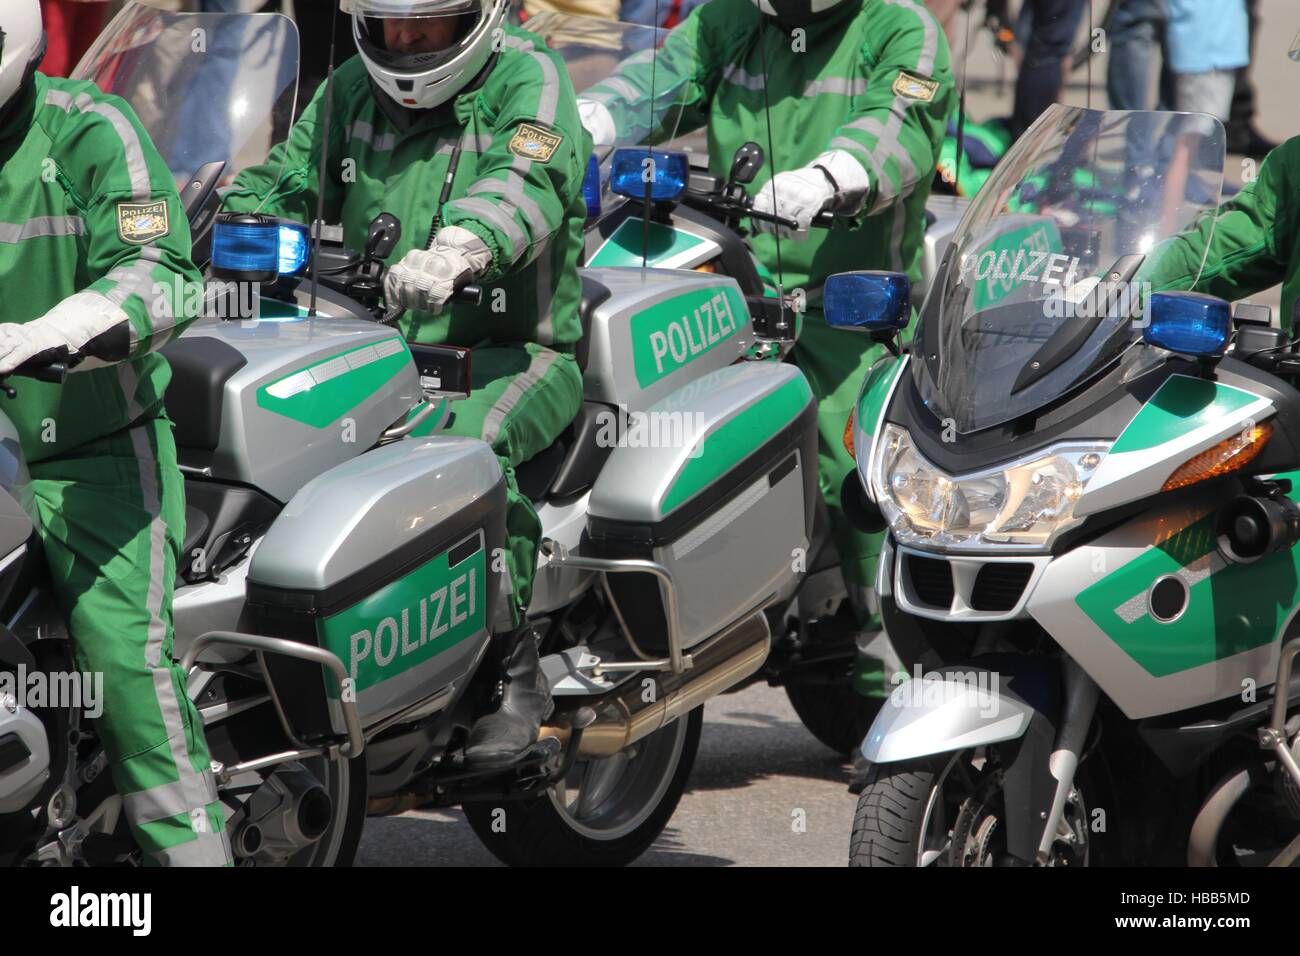 police motorcycles Stock Photo